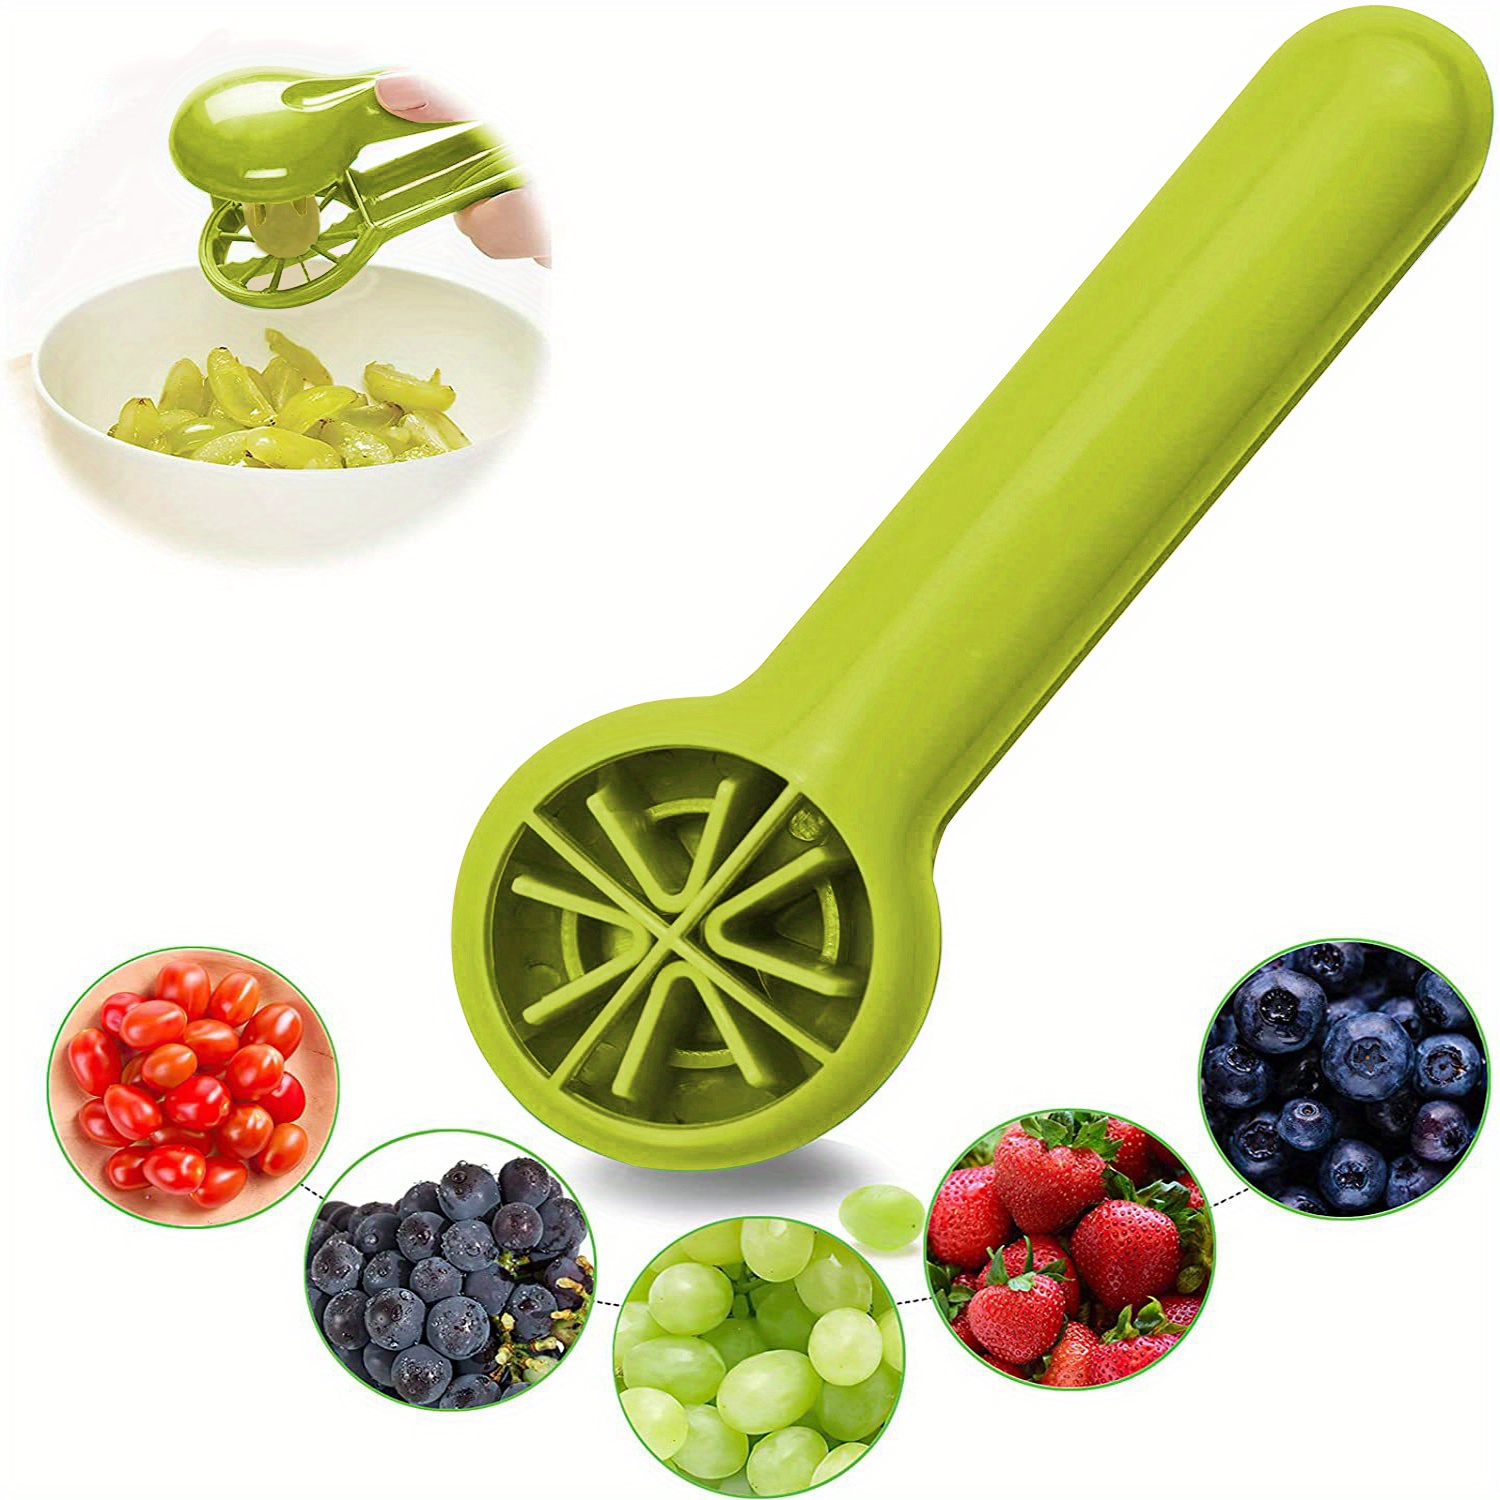 Yamteck Grapes Cherry Tomatoes Cutter Slicer Half or Quarter Cutting 16Pcs  at a Time, Food Grade Material, Dishwasher Safe, Fruit Container Holder